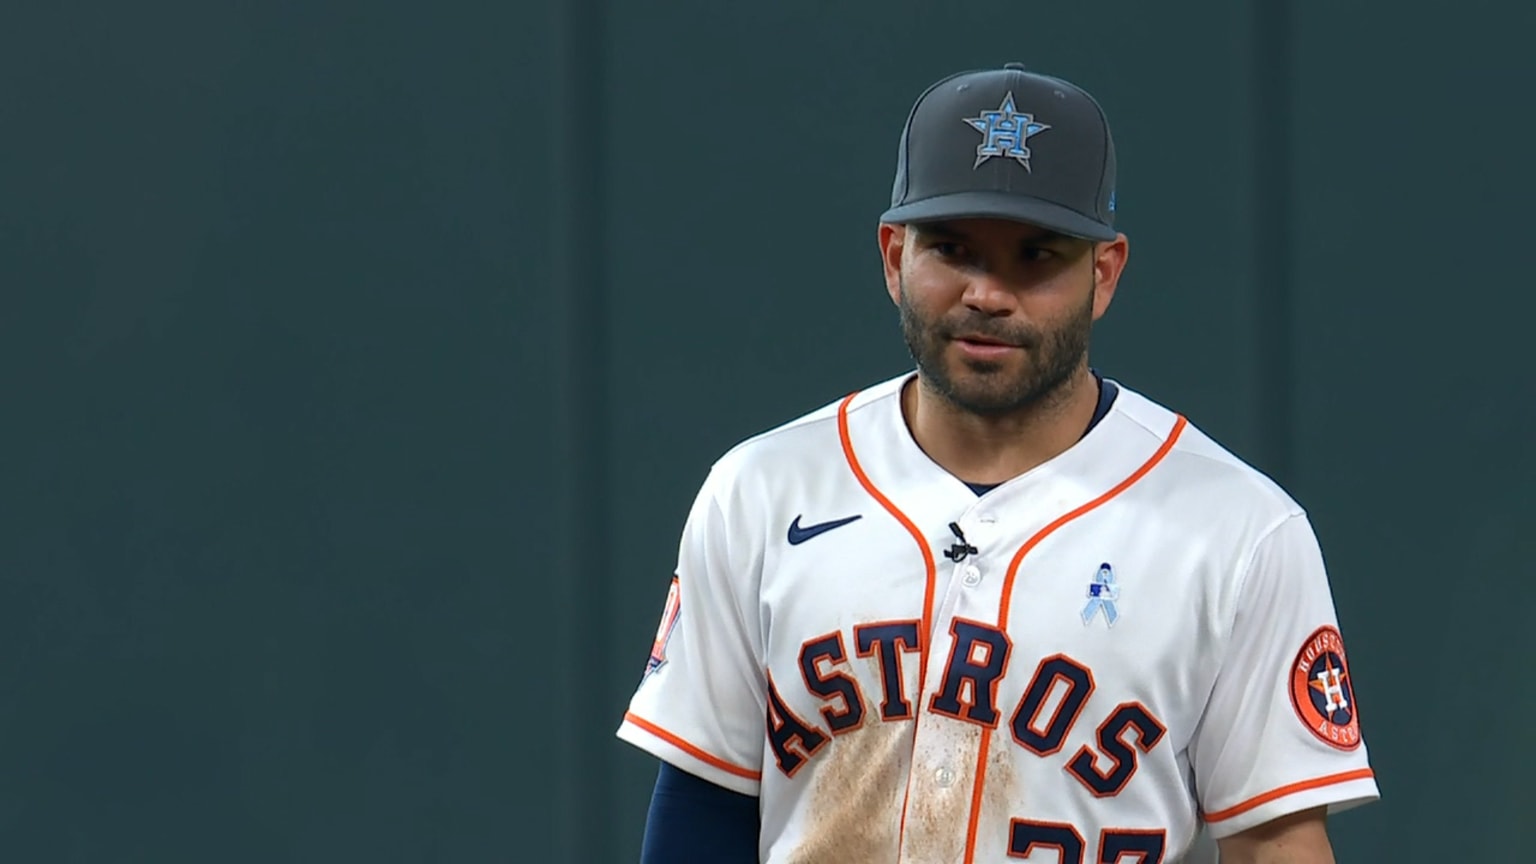 Young Astros Fan Gets Hat From Jose Altuve, Immediately Starts